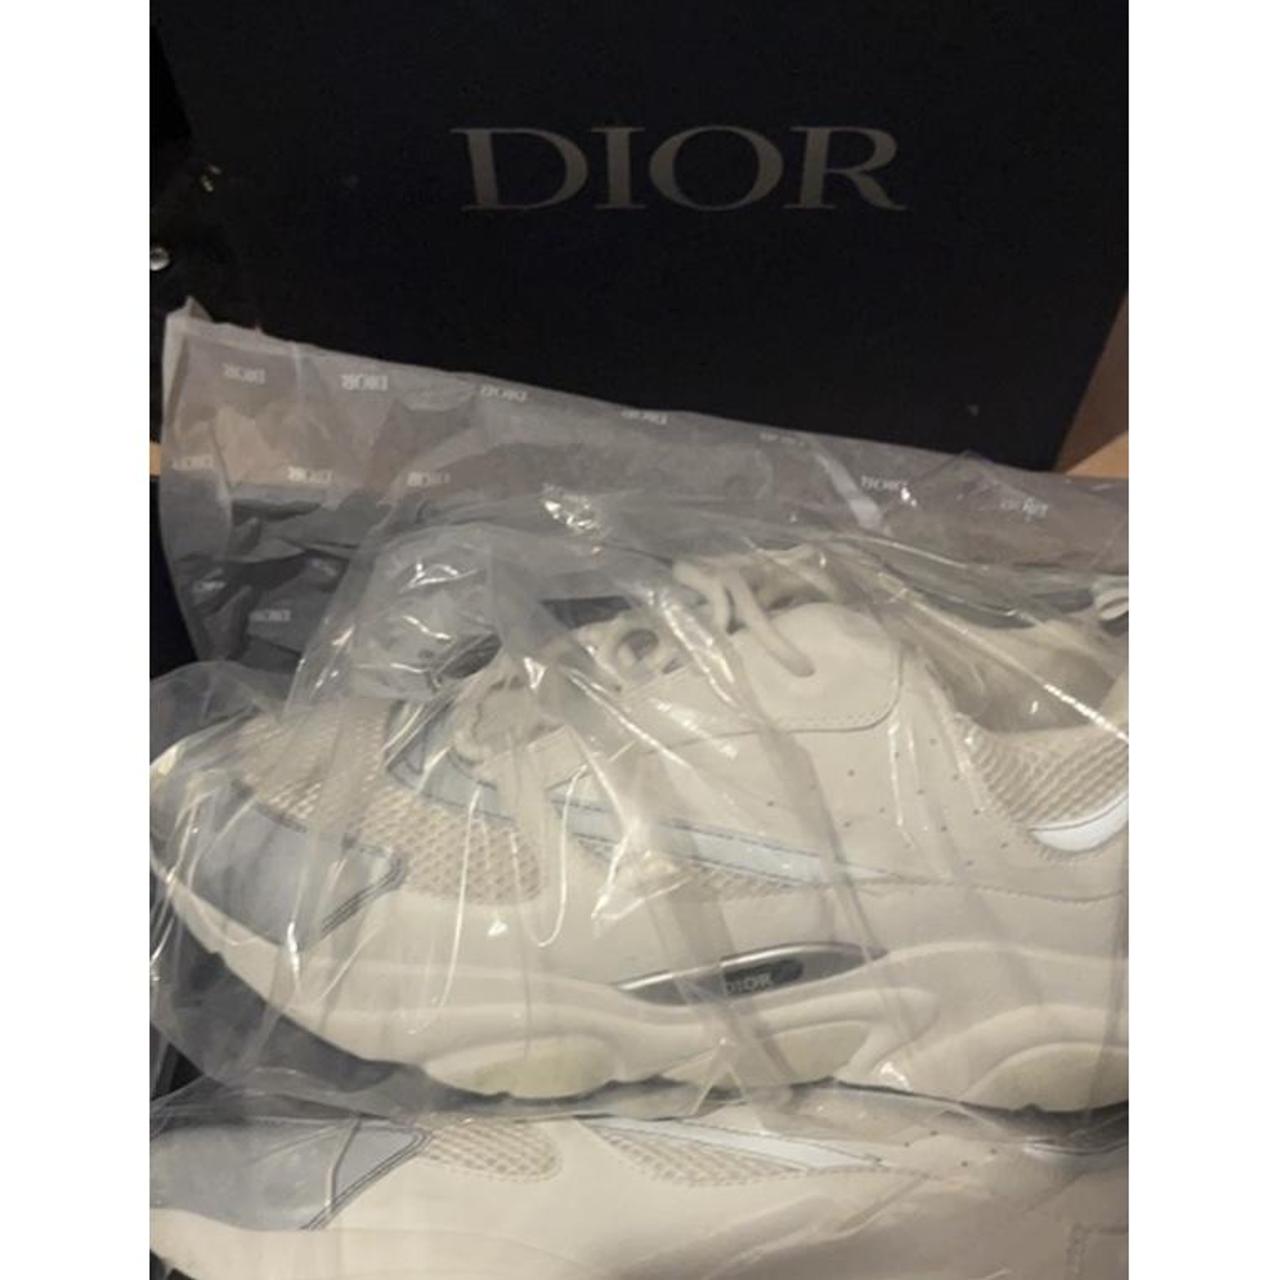 Dior b22// white brand new//great condition selling... - Depop